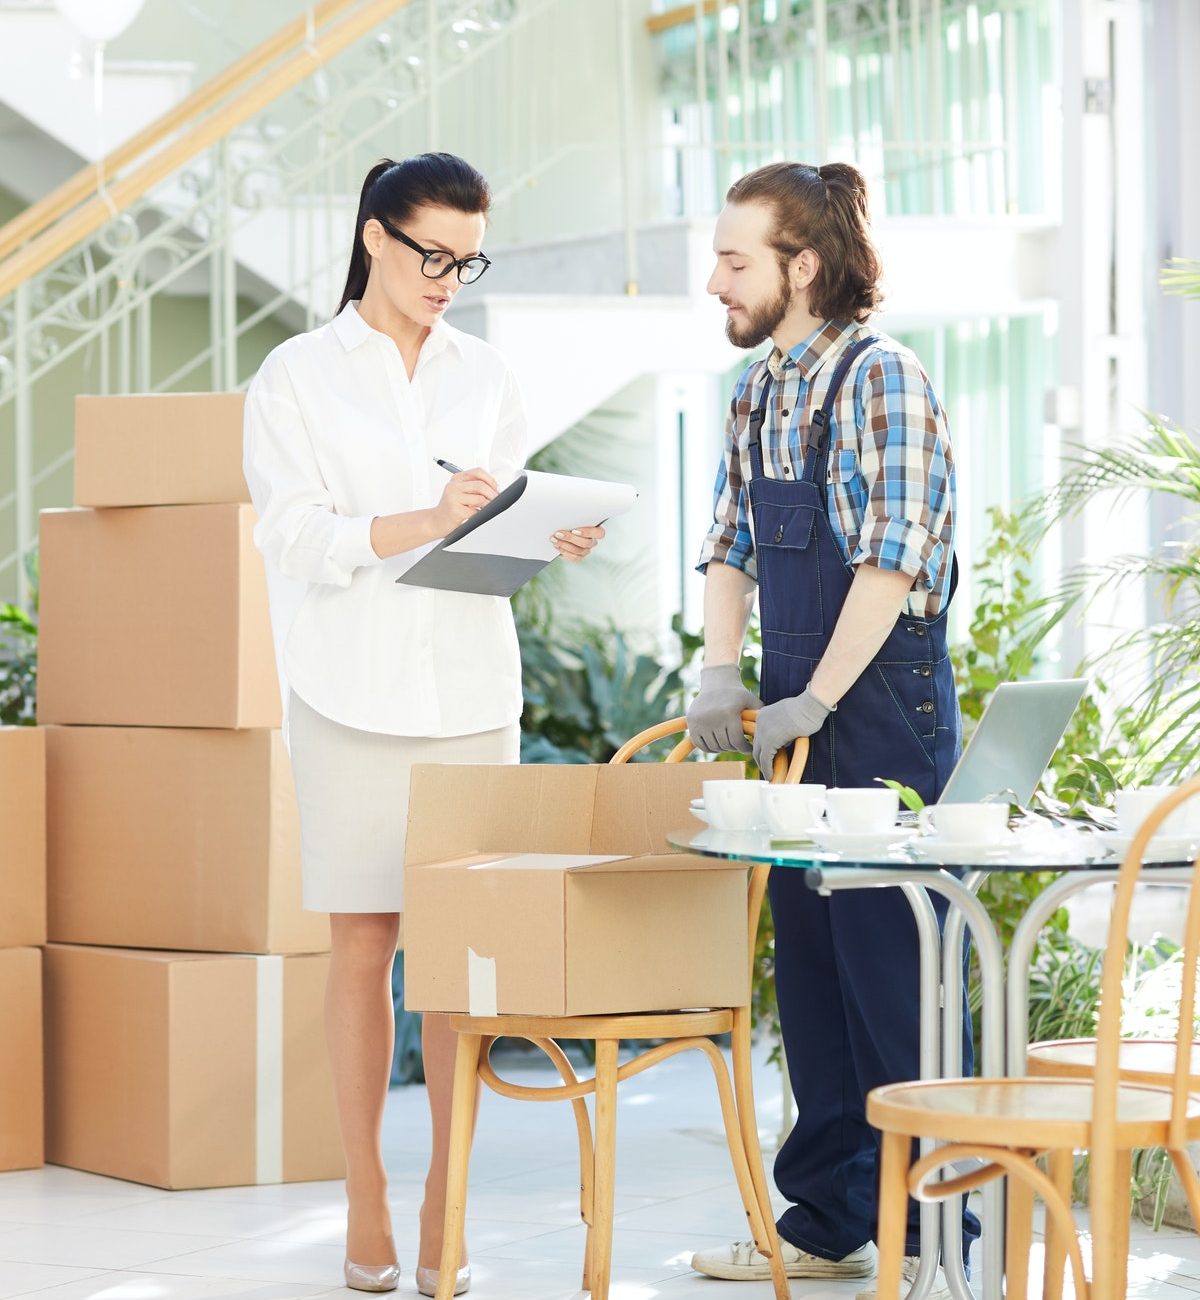 Best Movers in Abu Dhabi